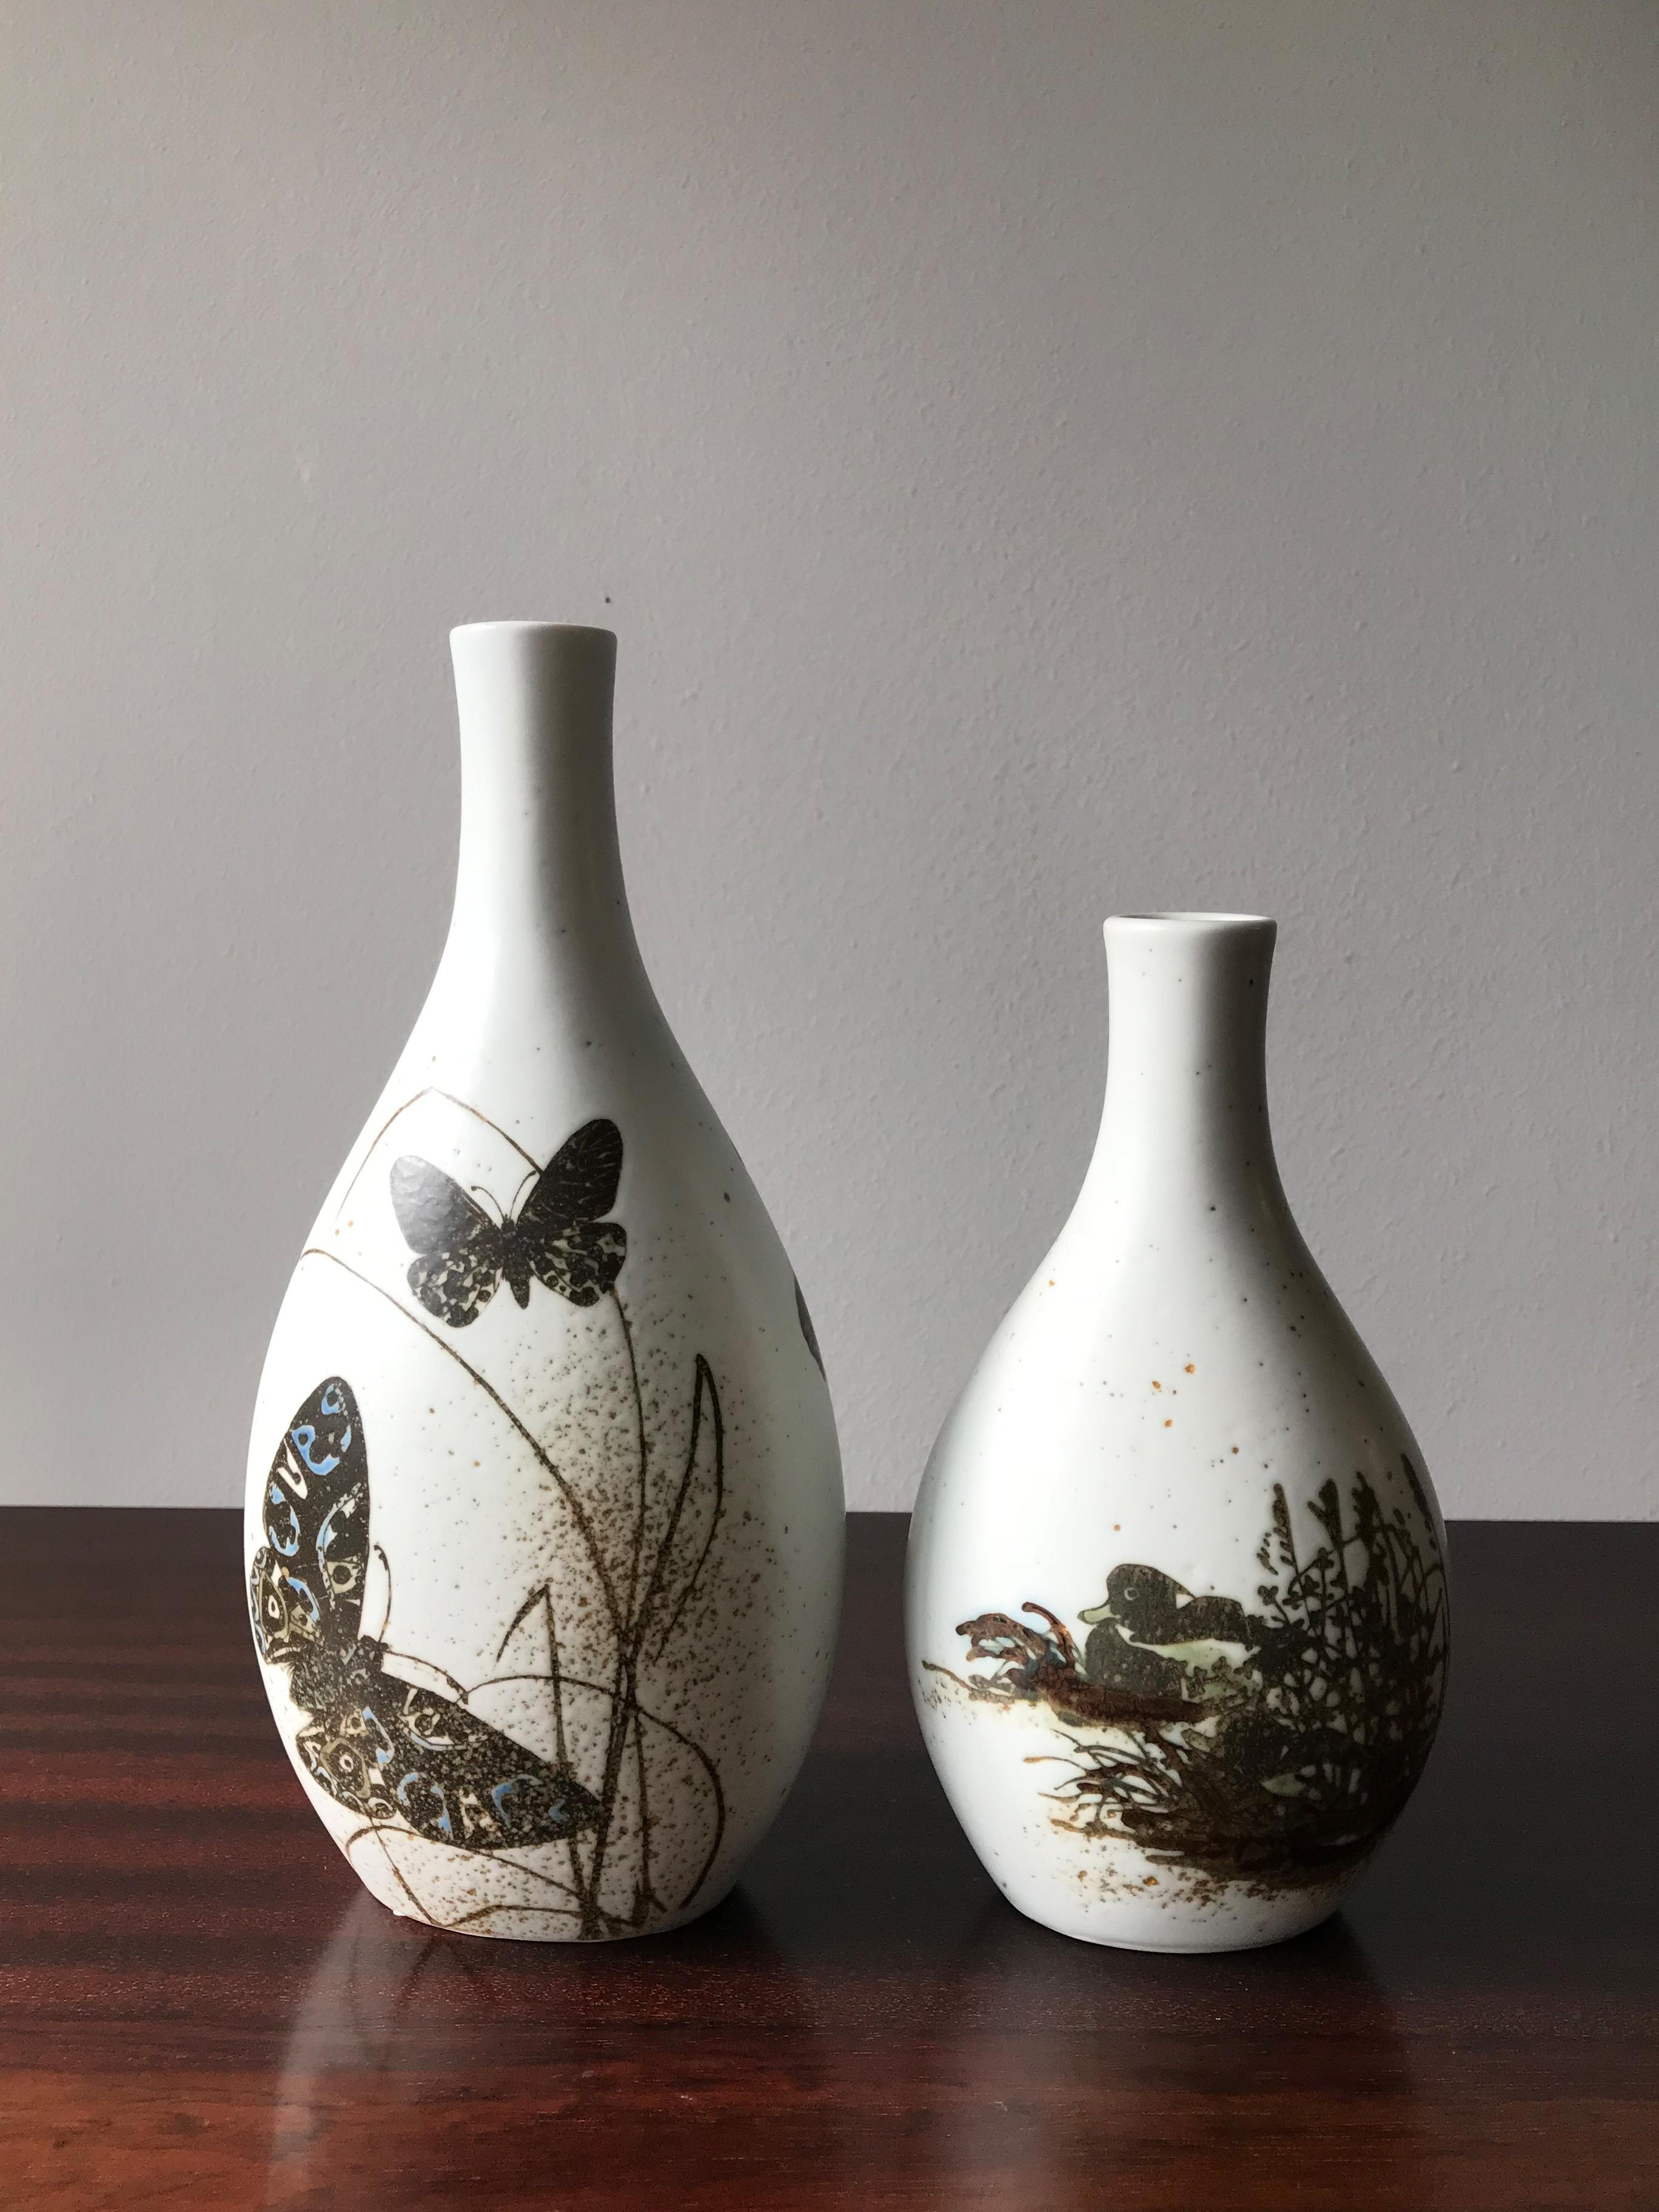 Set of two Danish ceramic vases designed by Nils Thorsson and produced by Royal Copenhagen from 1960s, made in Denmark.
Measurements from the left:
height 24 cm - width 12 cm - depth 8 cm
height 19 cm - width 11 cm - depth 7 cm.